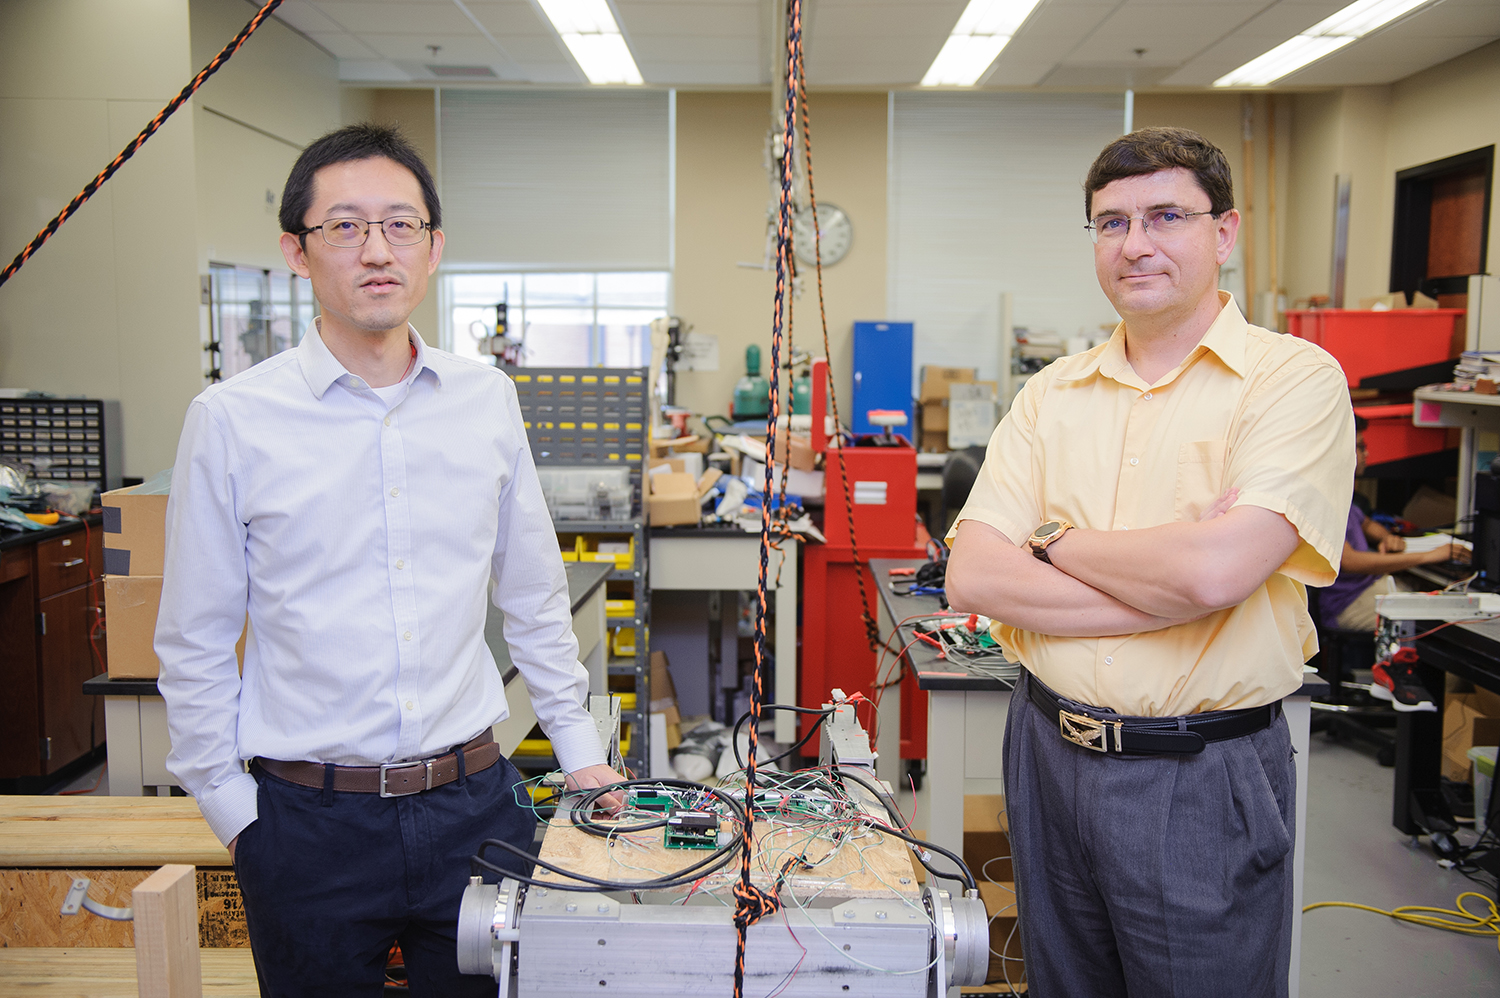 dr. shen and dr. sazzonov in a lab filled with electrical equipment